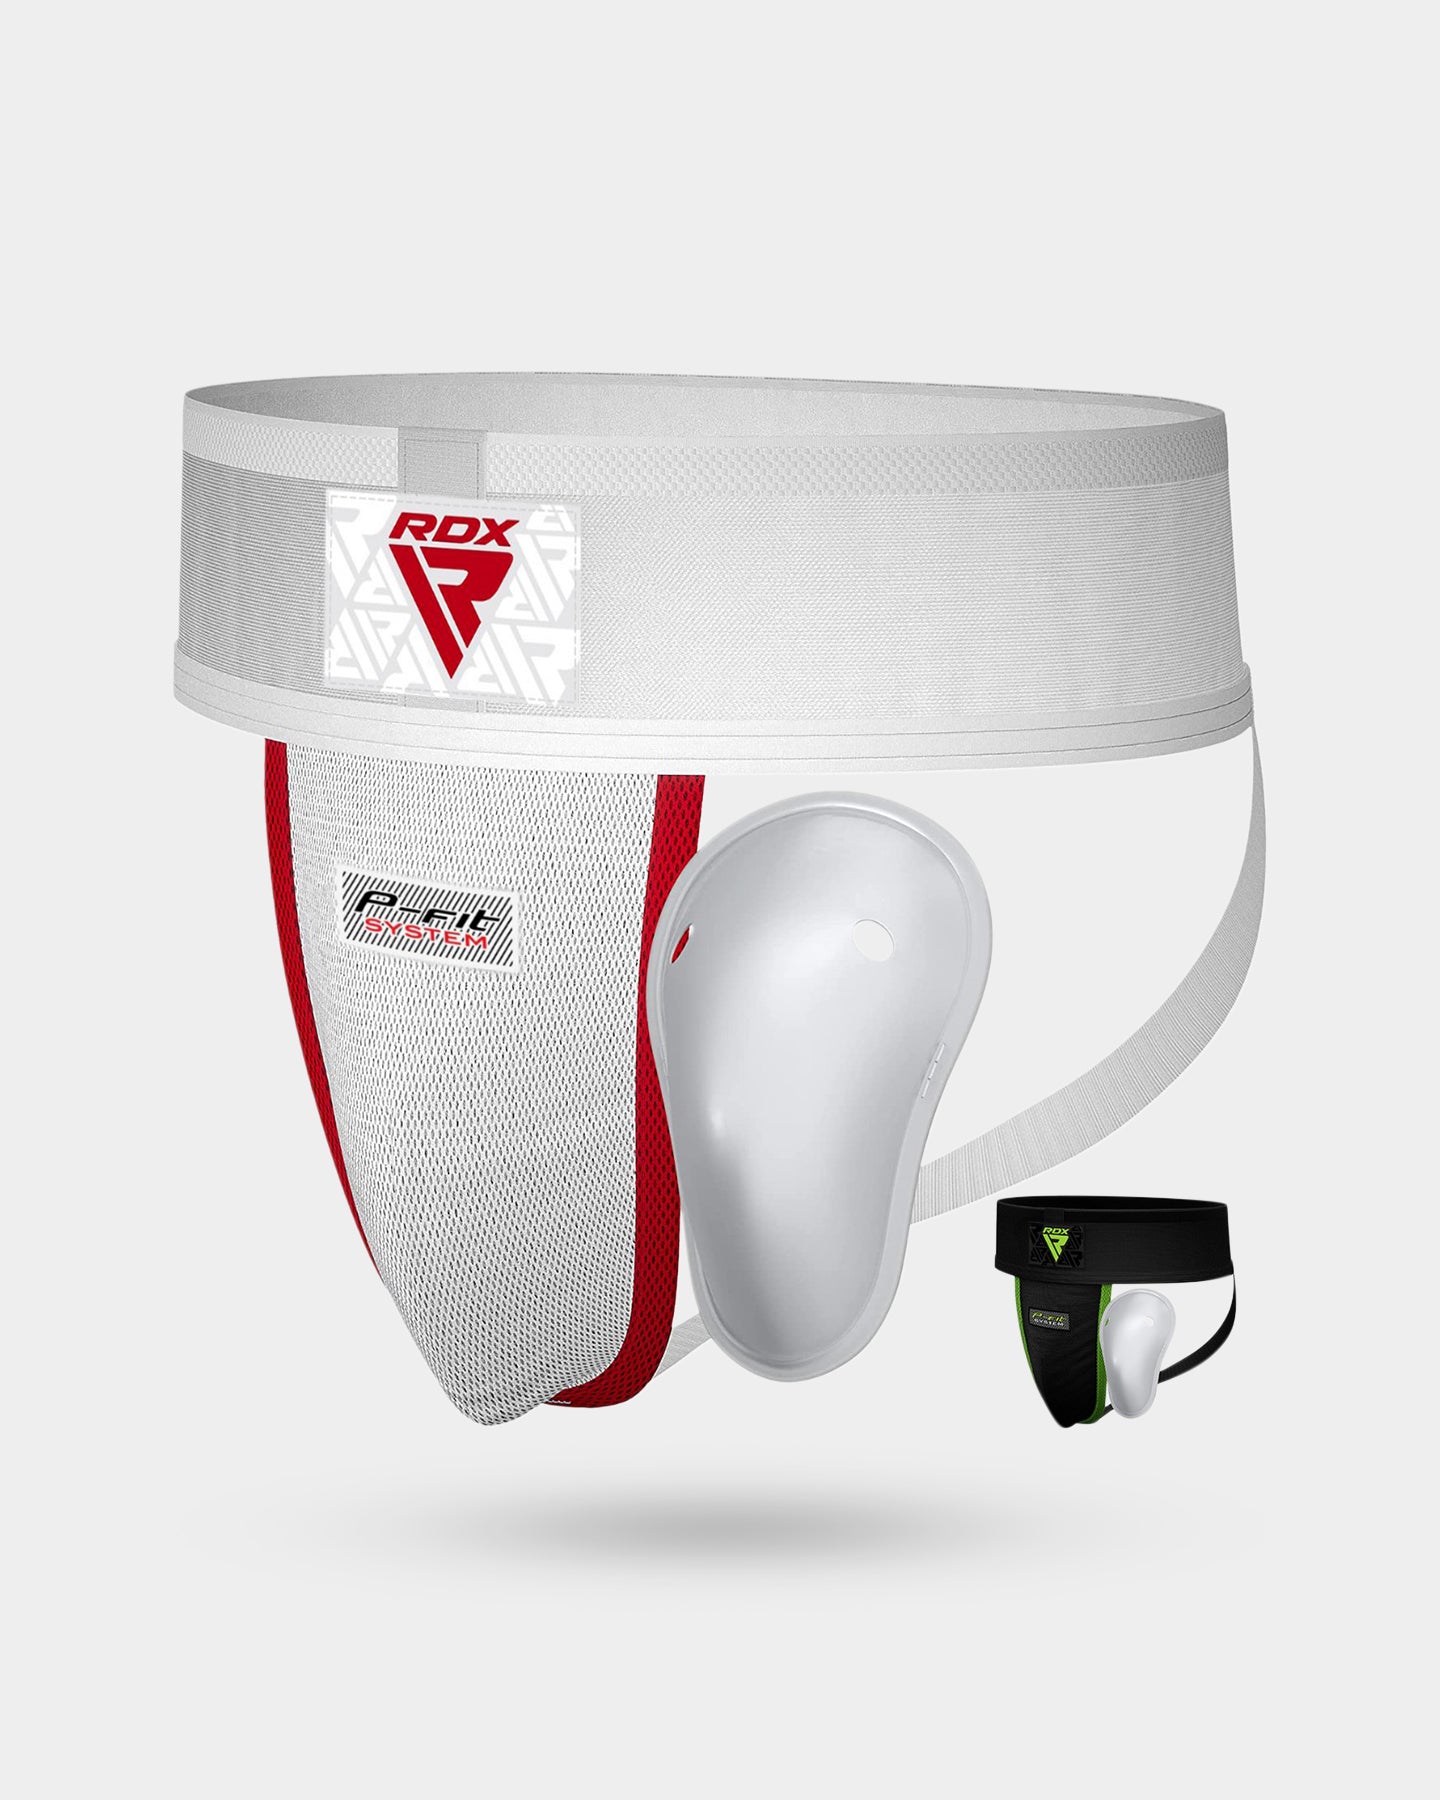 RDX Sports H1 Groin Guard Support With Gel Cup, S, White v1 A1